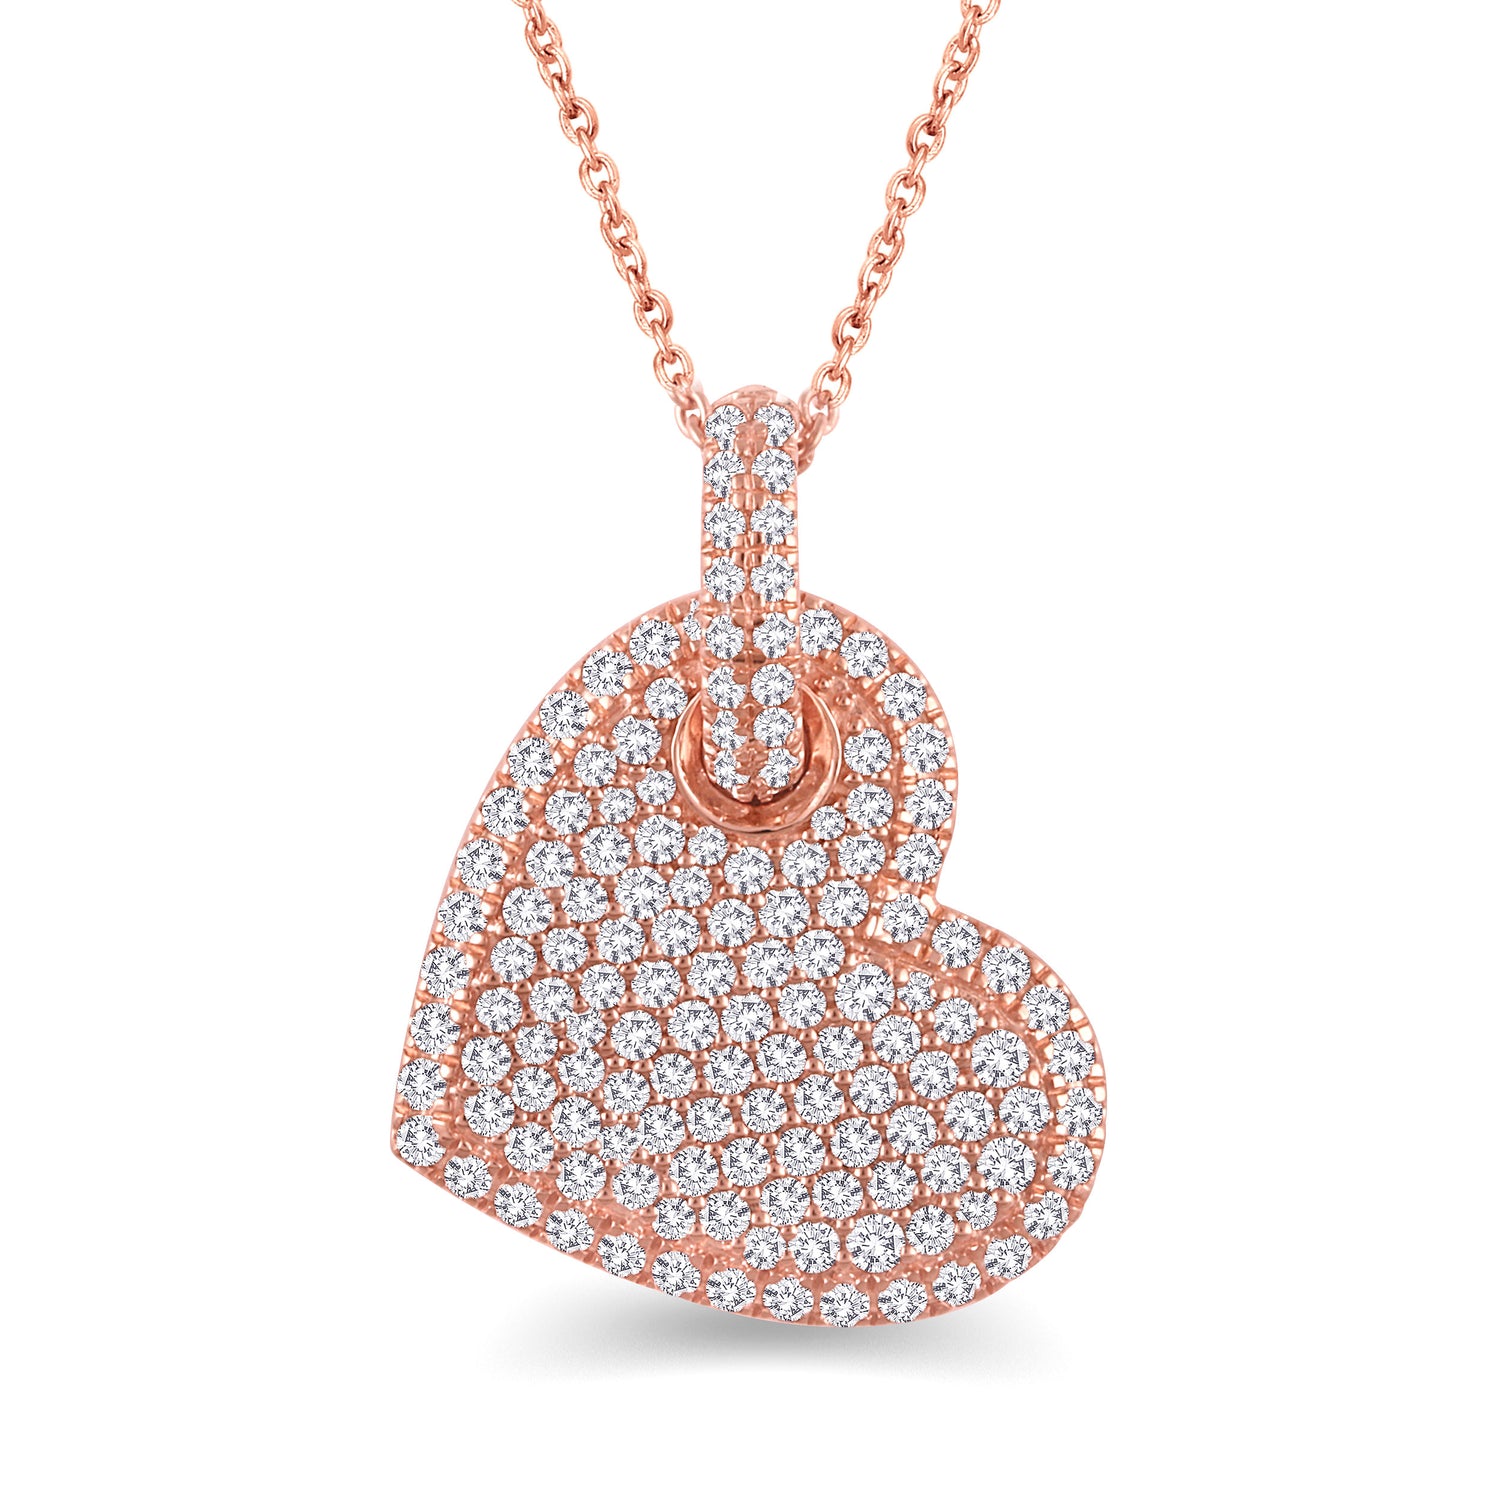 1.00 Cttw Diamond Pave Heart Pendant Necklace in 14K Rose Gold